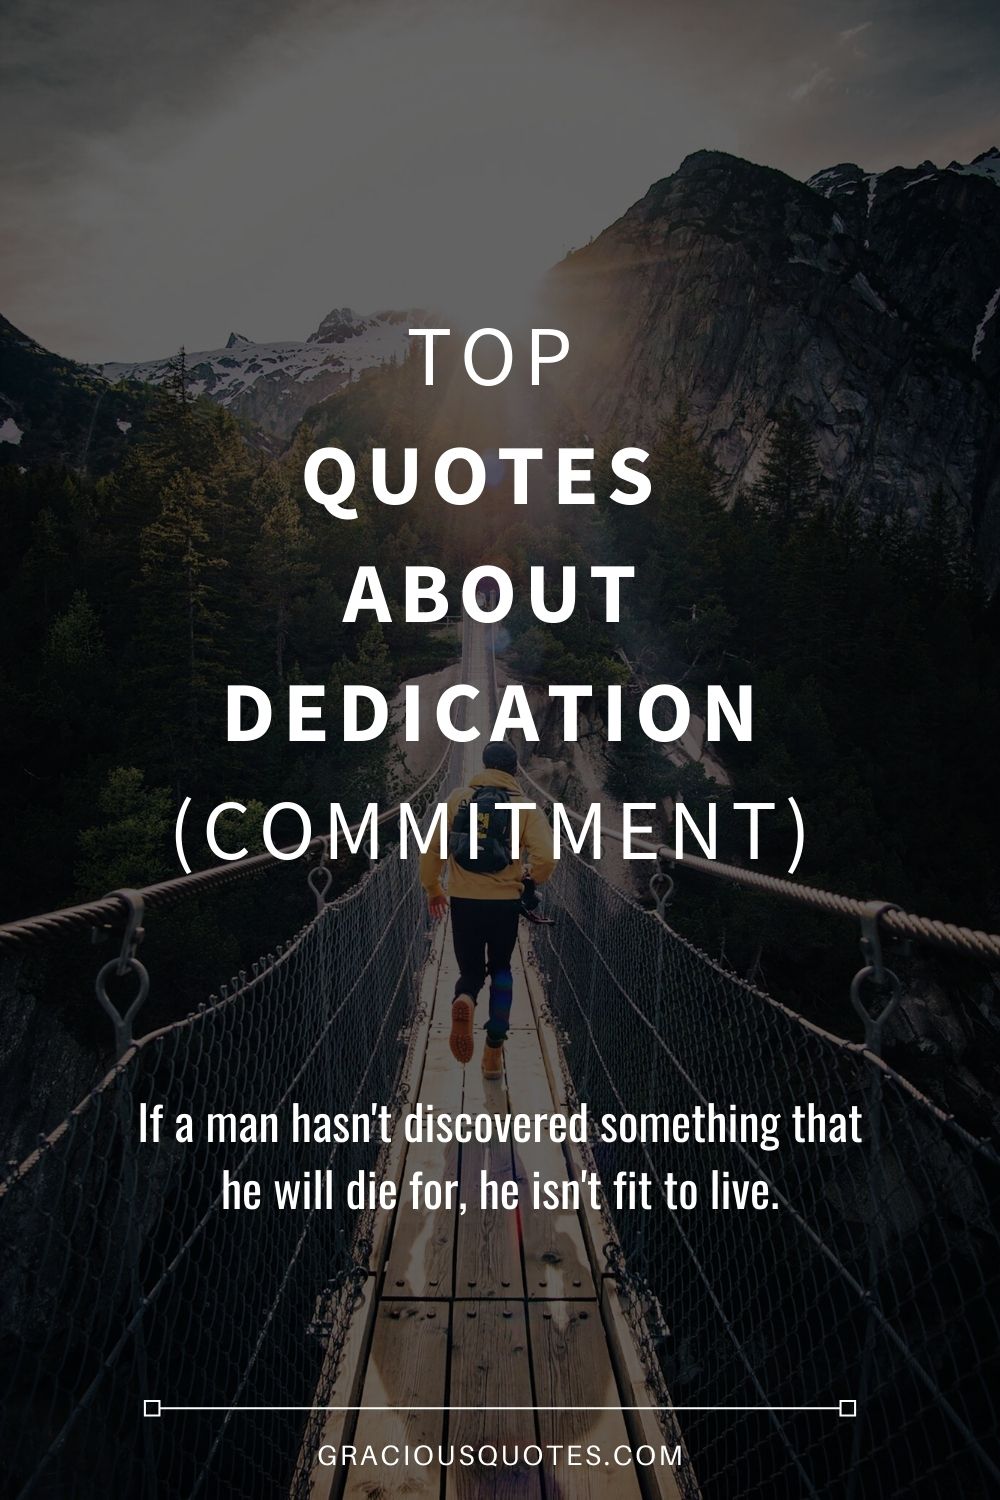 Top Quotes About Dedication (COMMITMENT) - Gracious Quotes